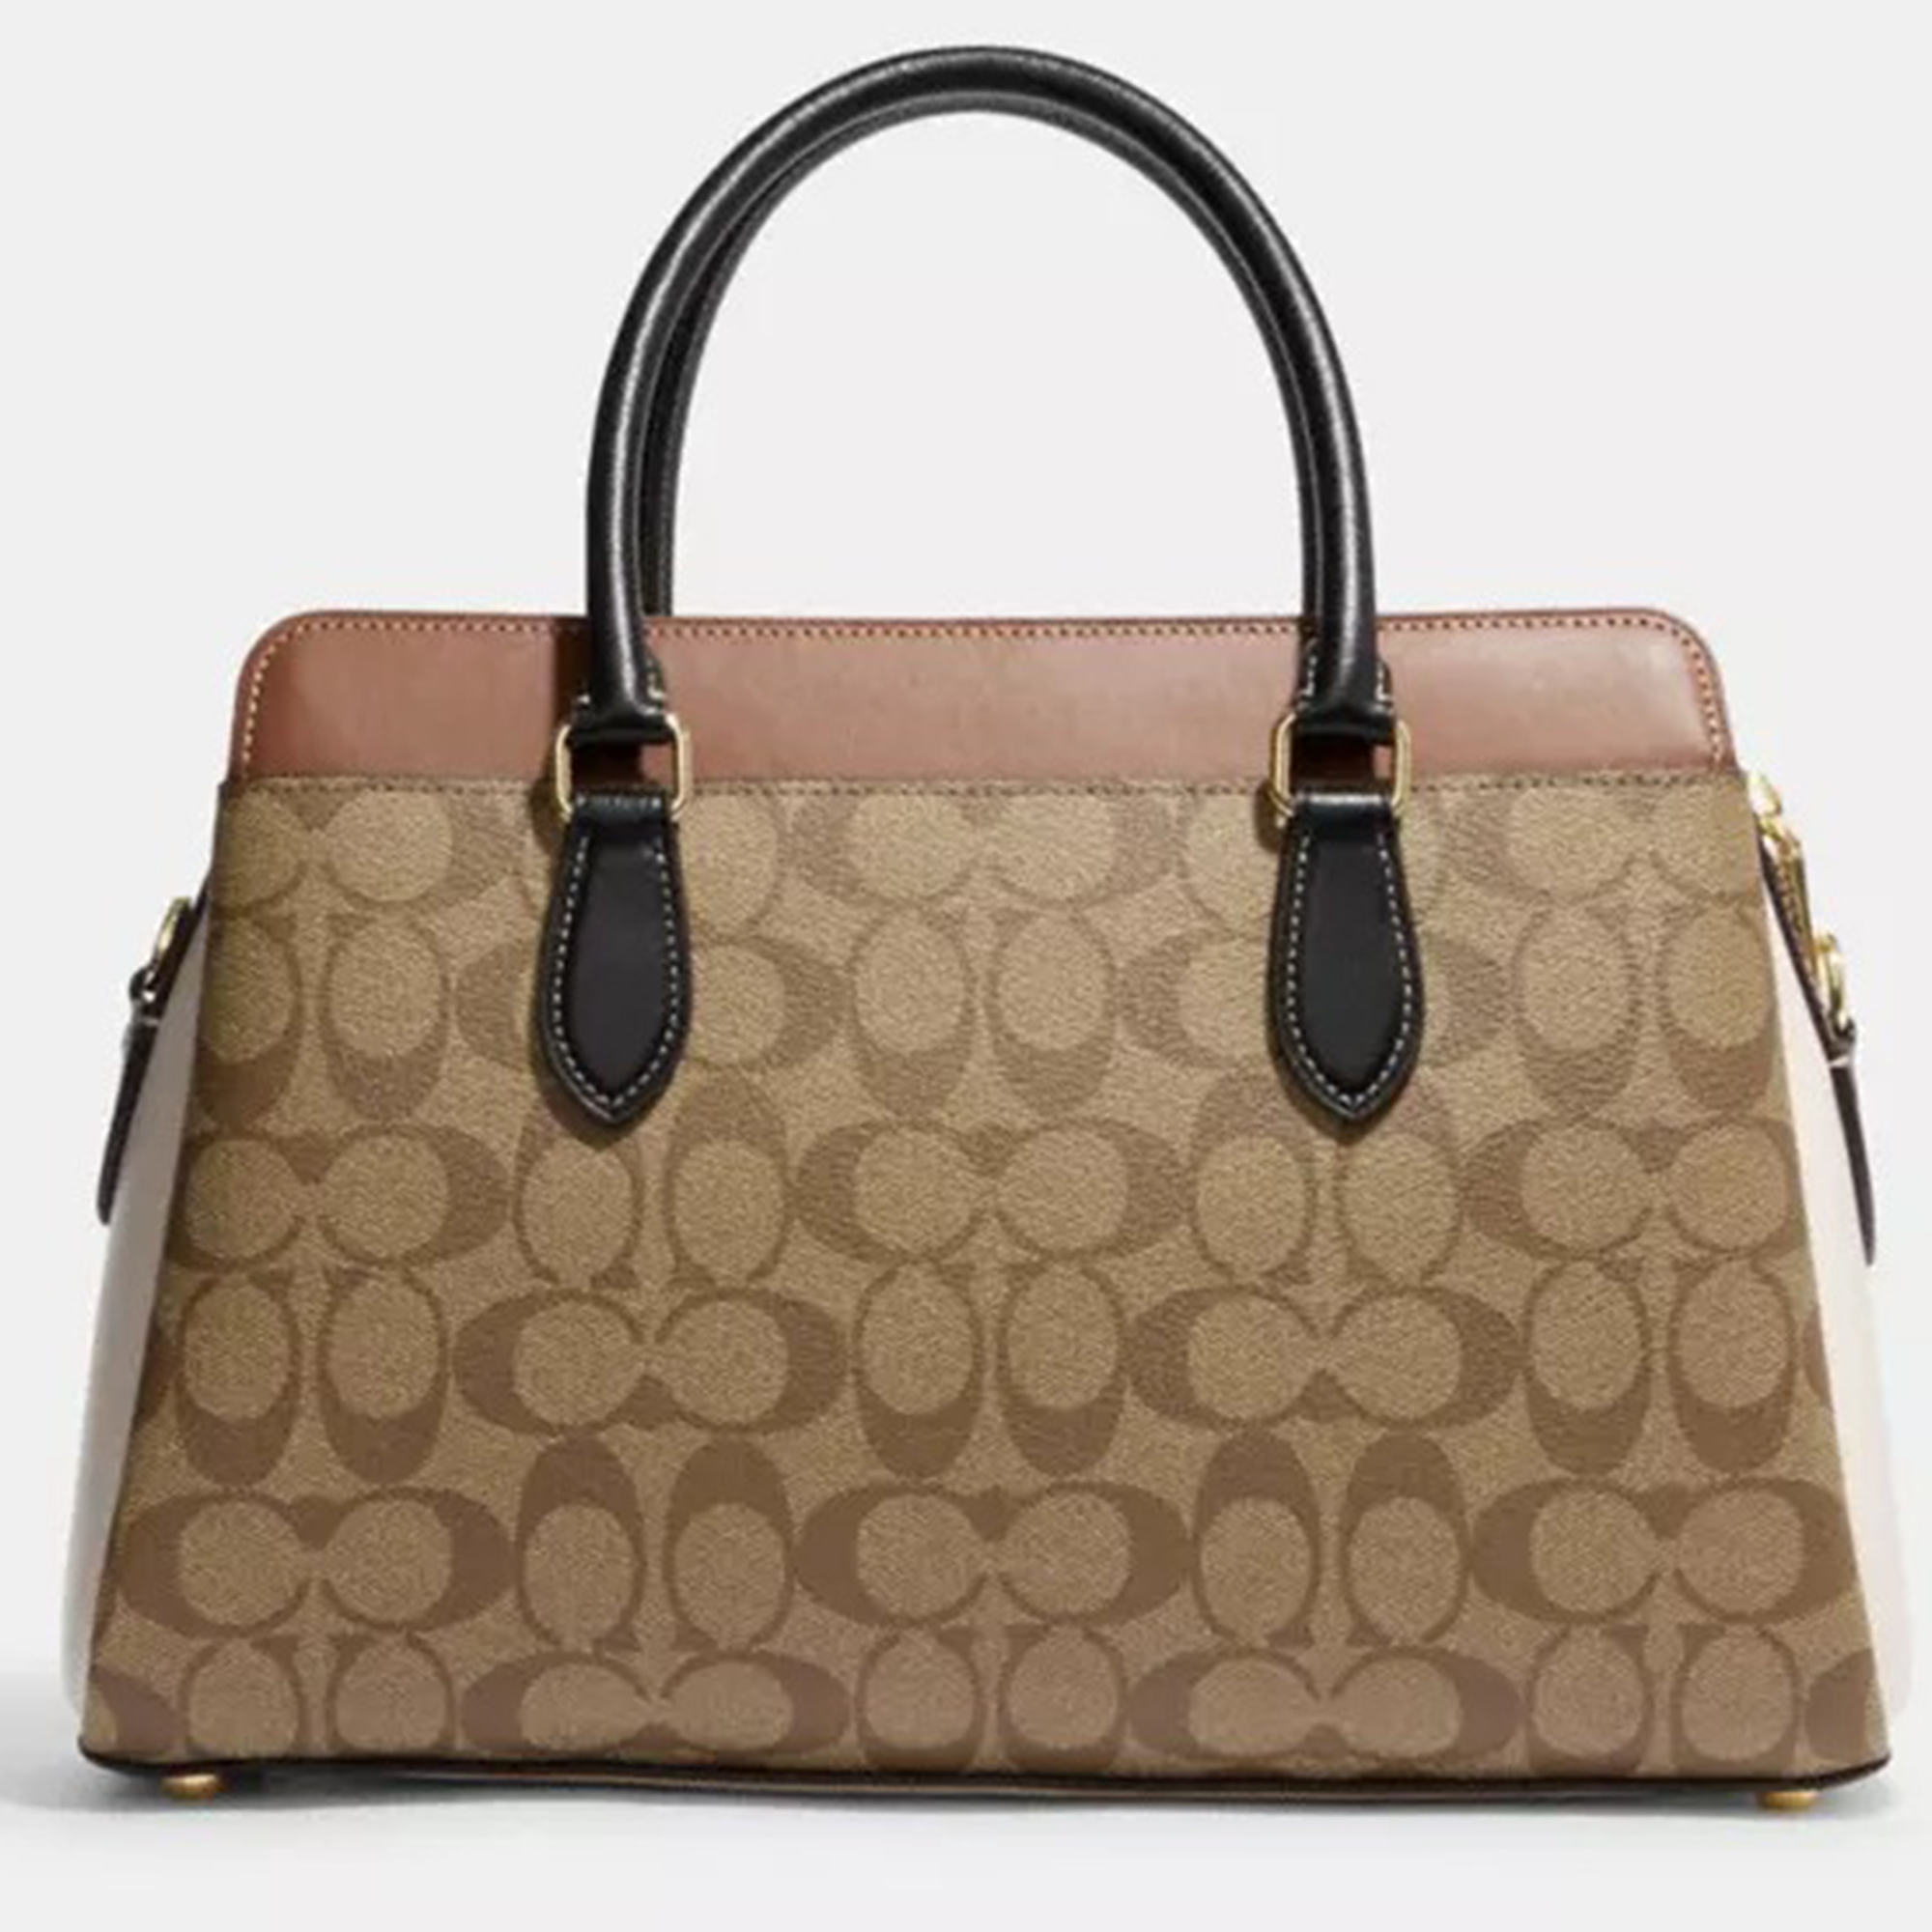 Coach Brown/Beige Signature Canvas And Leather Darcie Carryall Bag